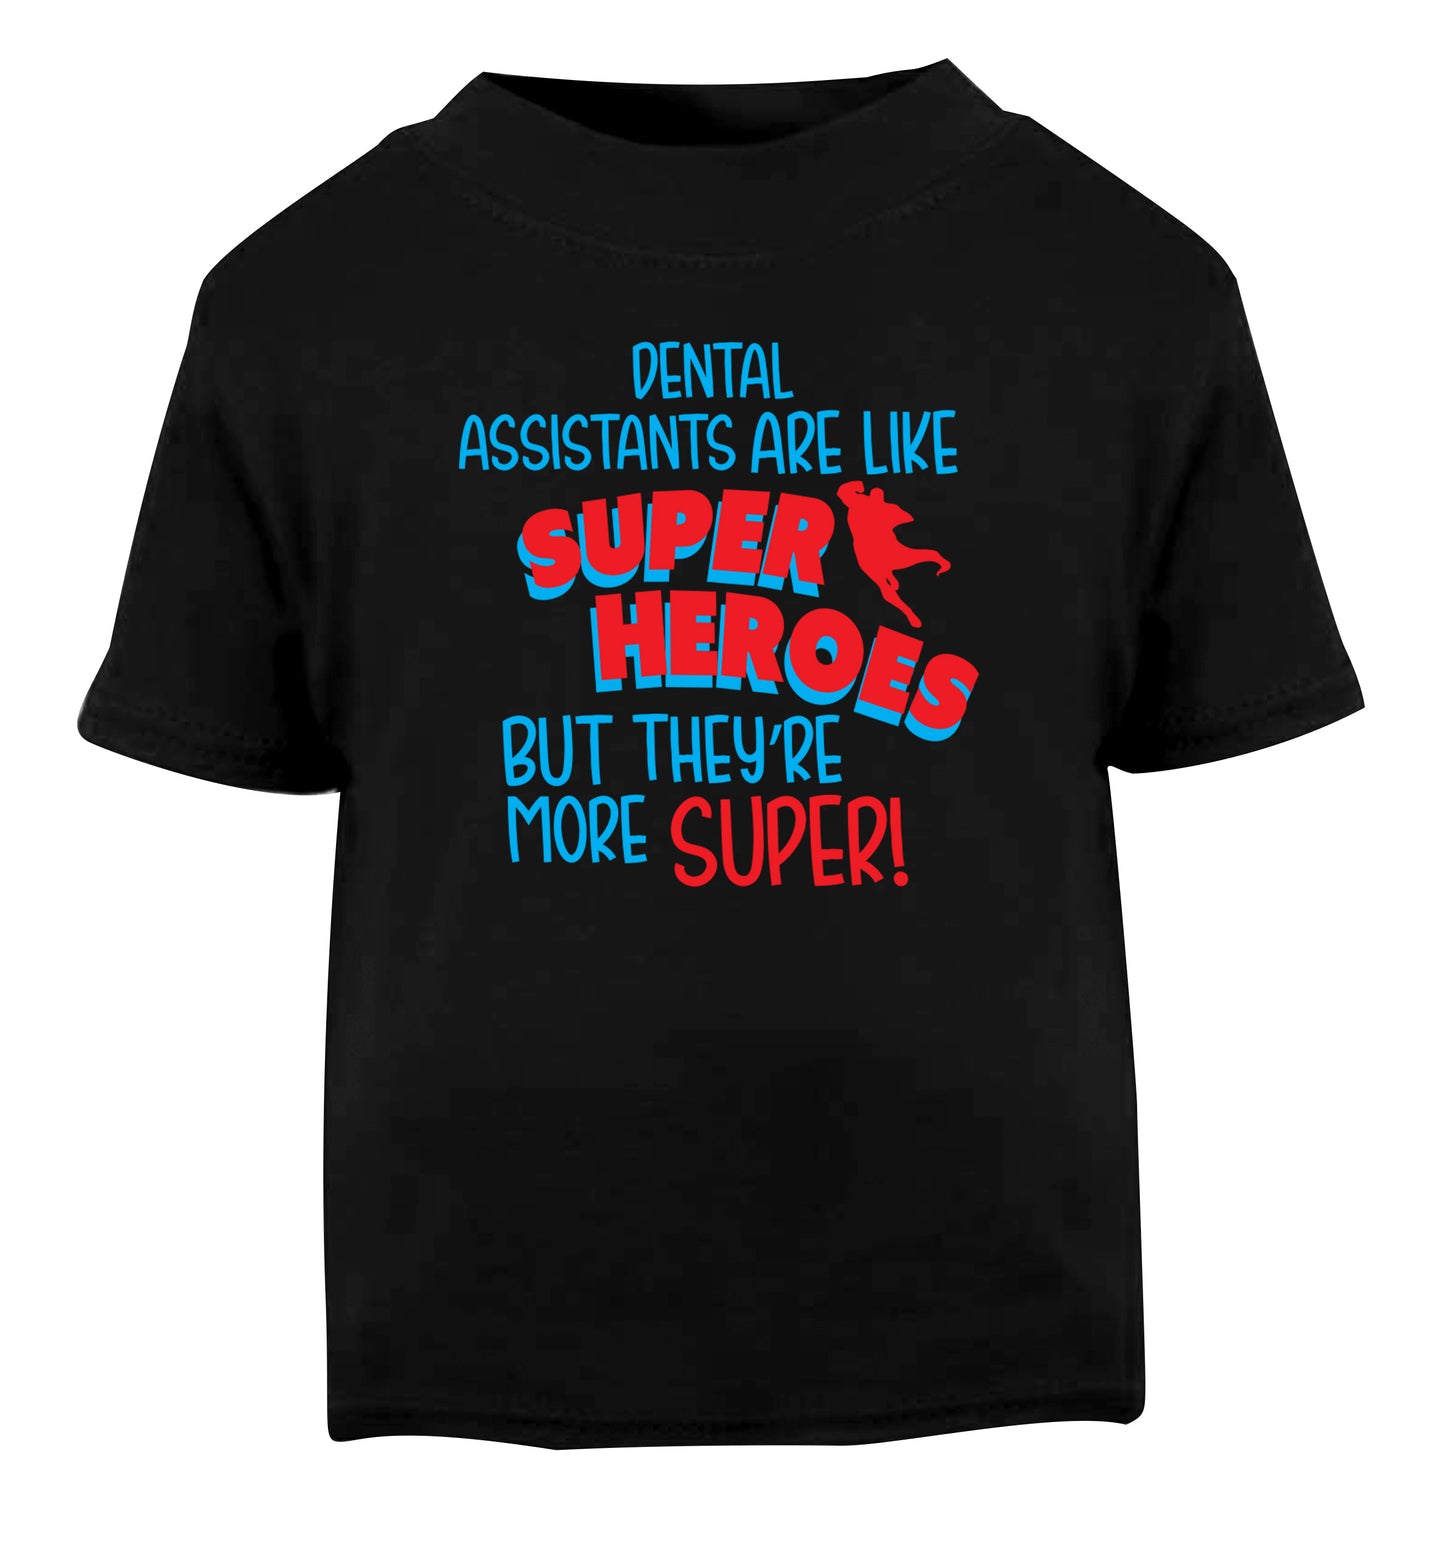 Dental Assistants are like superheros but they're more super Black Baby Toddler Tshirt 2 years